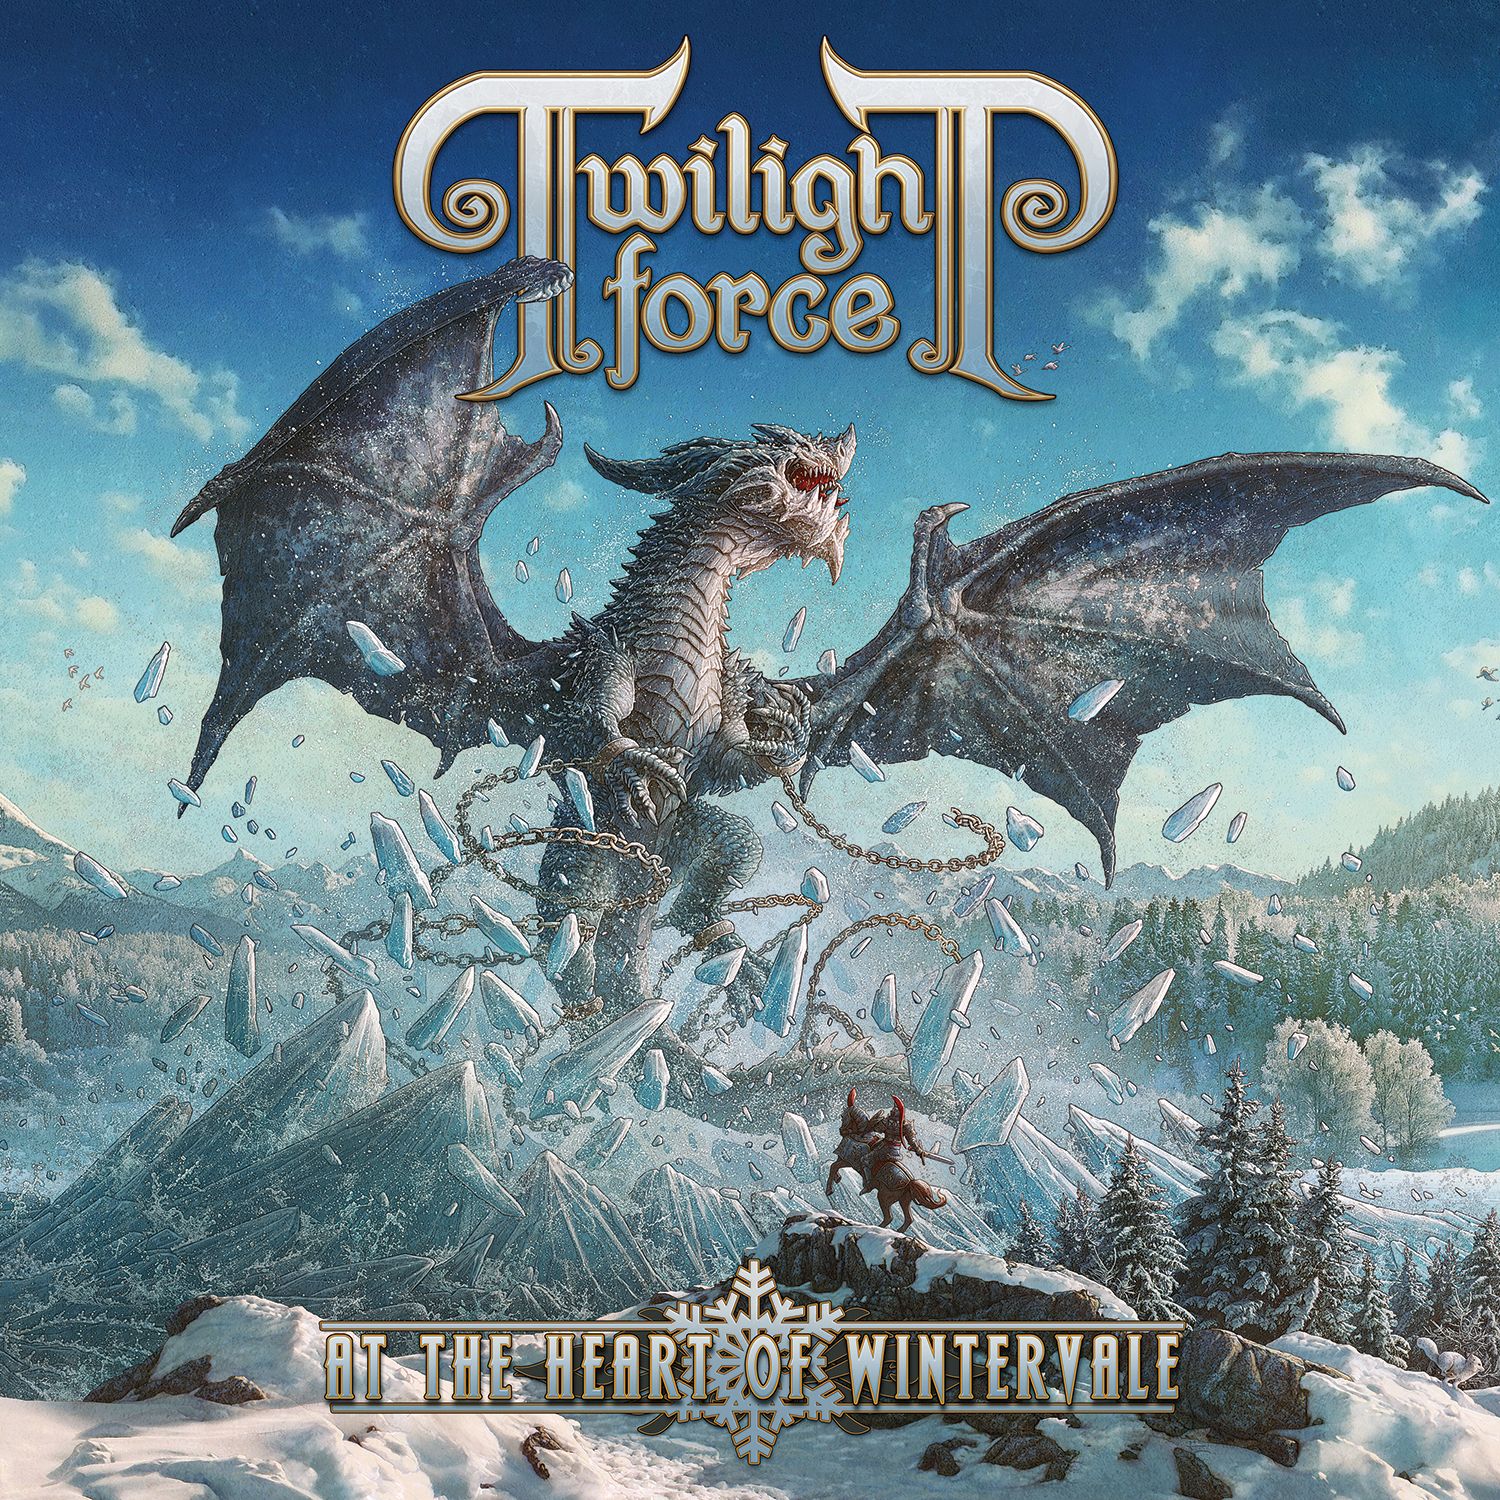 "At The Heart Of Wintervale"-Titelsong im Video